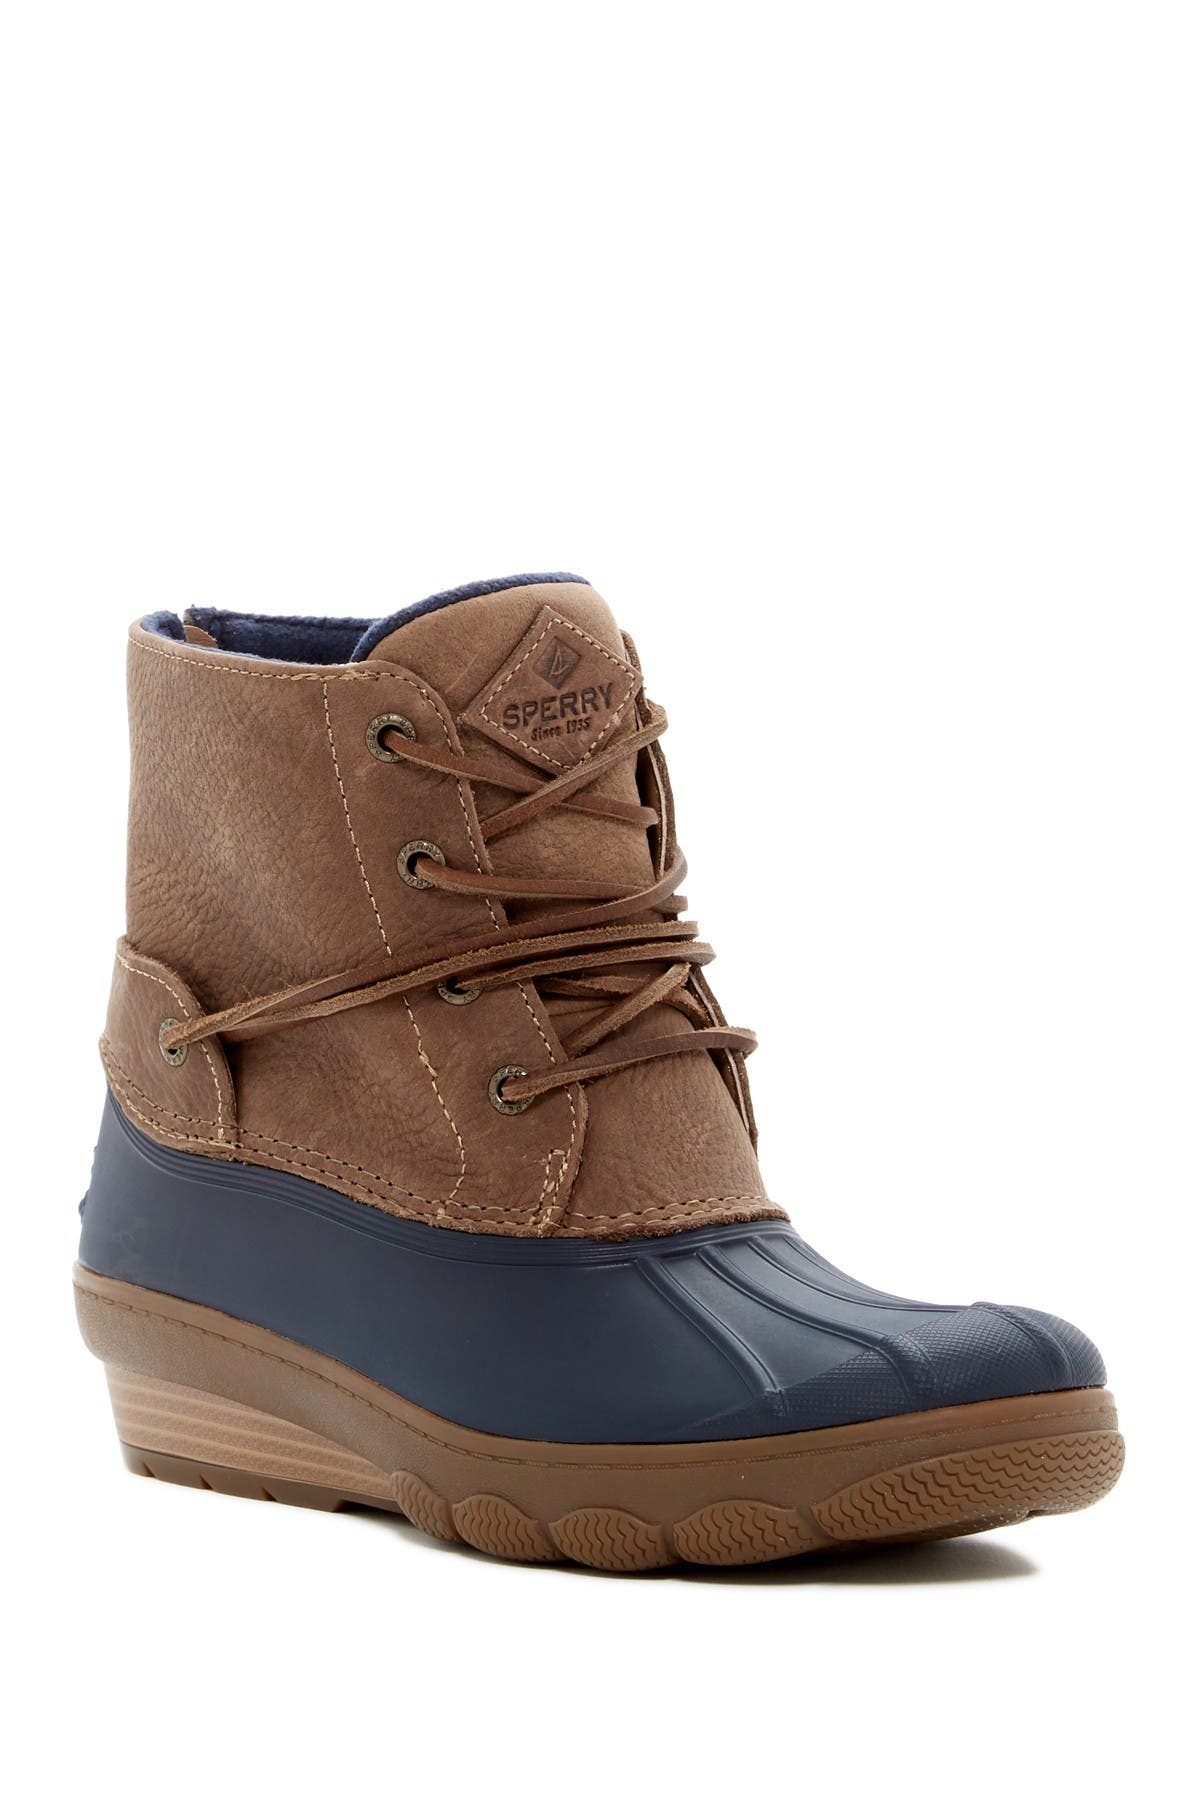 Sperry | Saltwater Wedge Tide Boot 